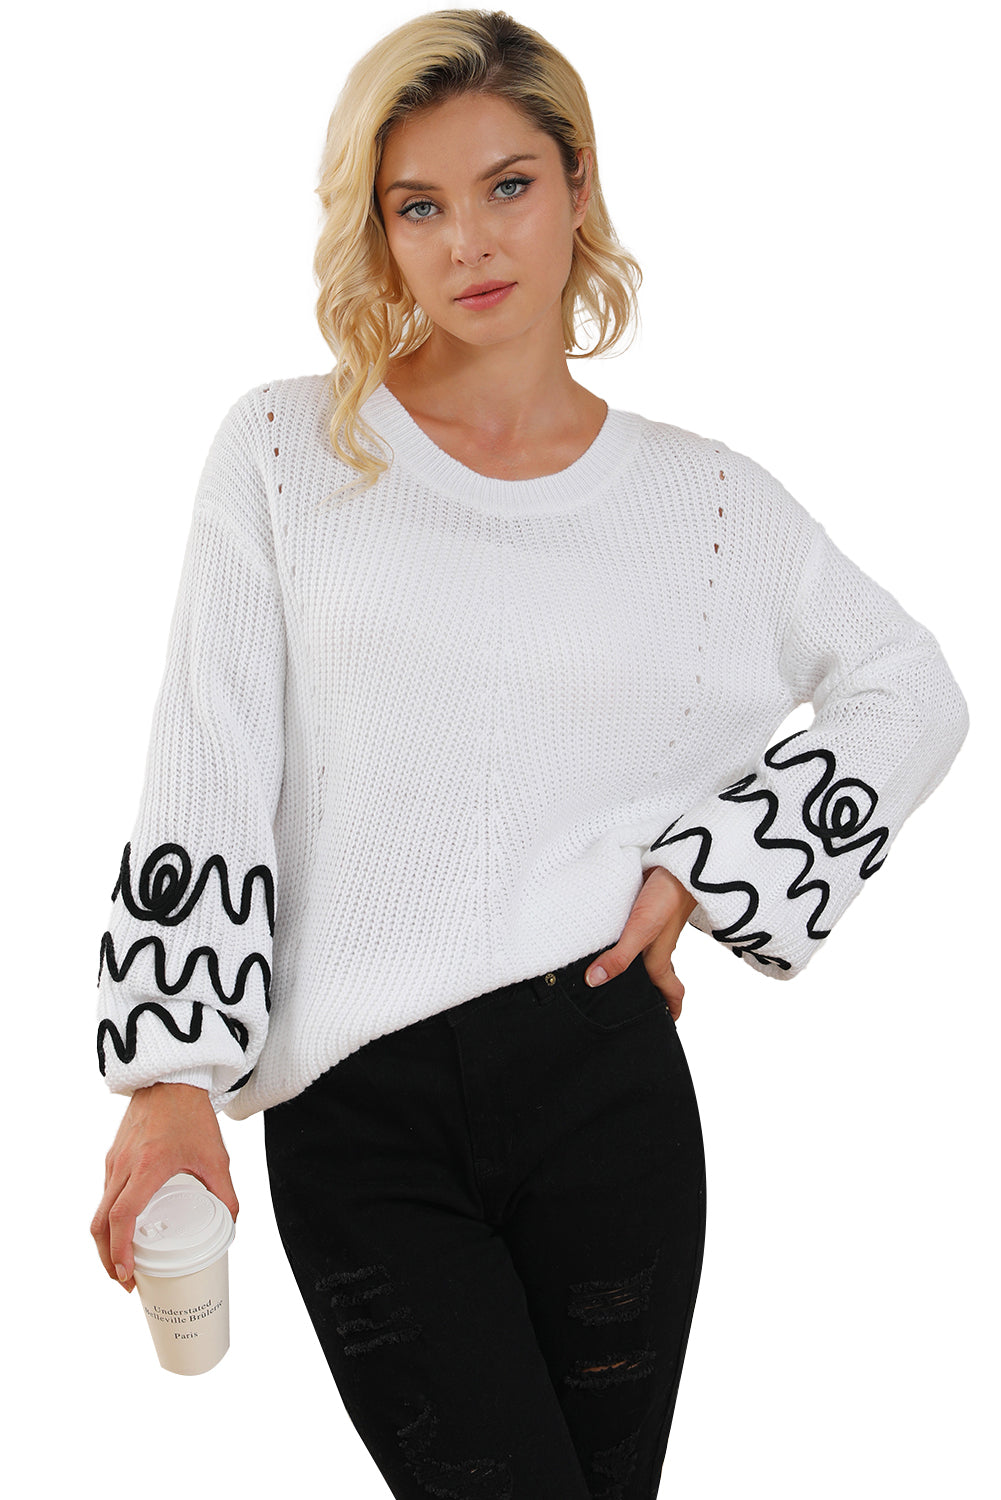 White Abstract Crochet Bubble Sleeve Loose Sweater